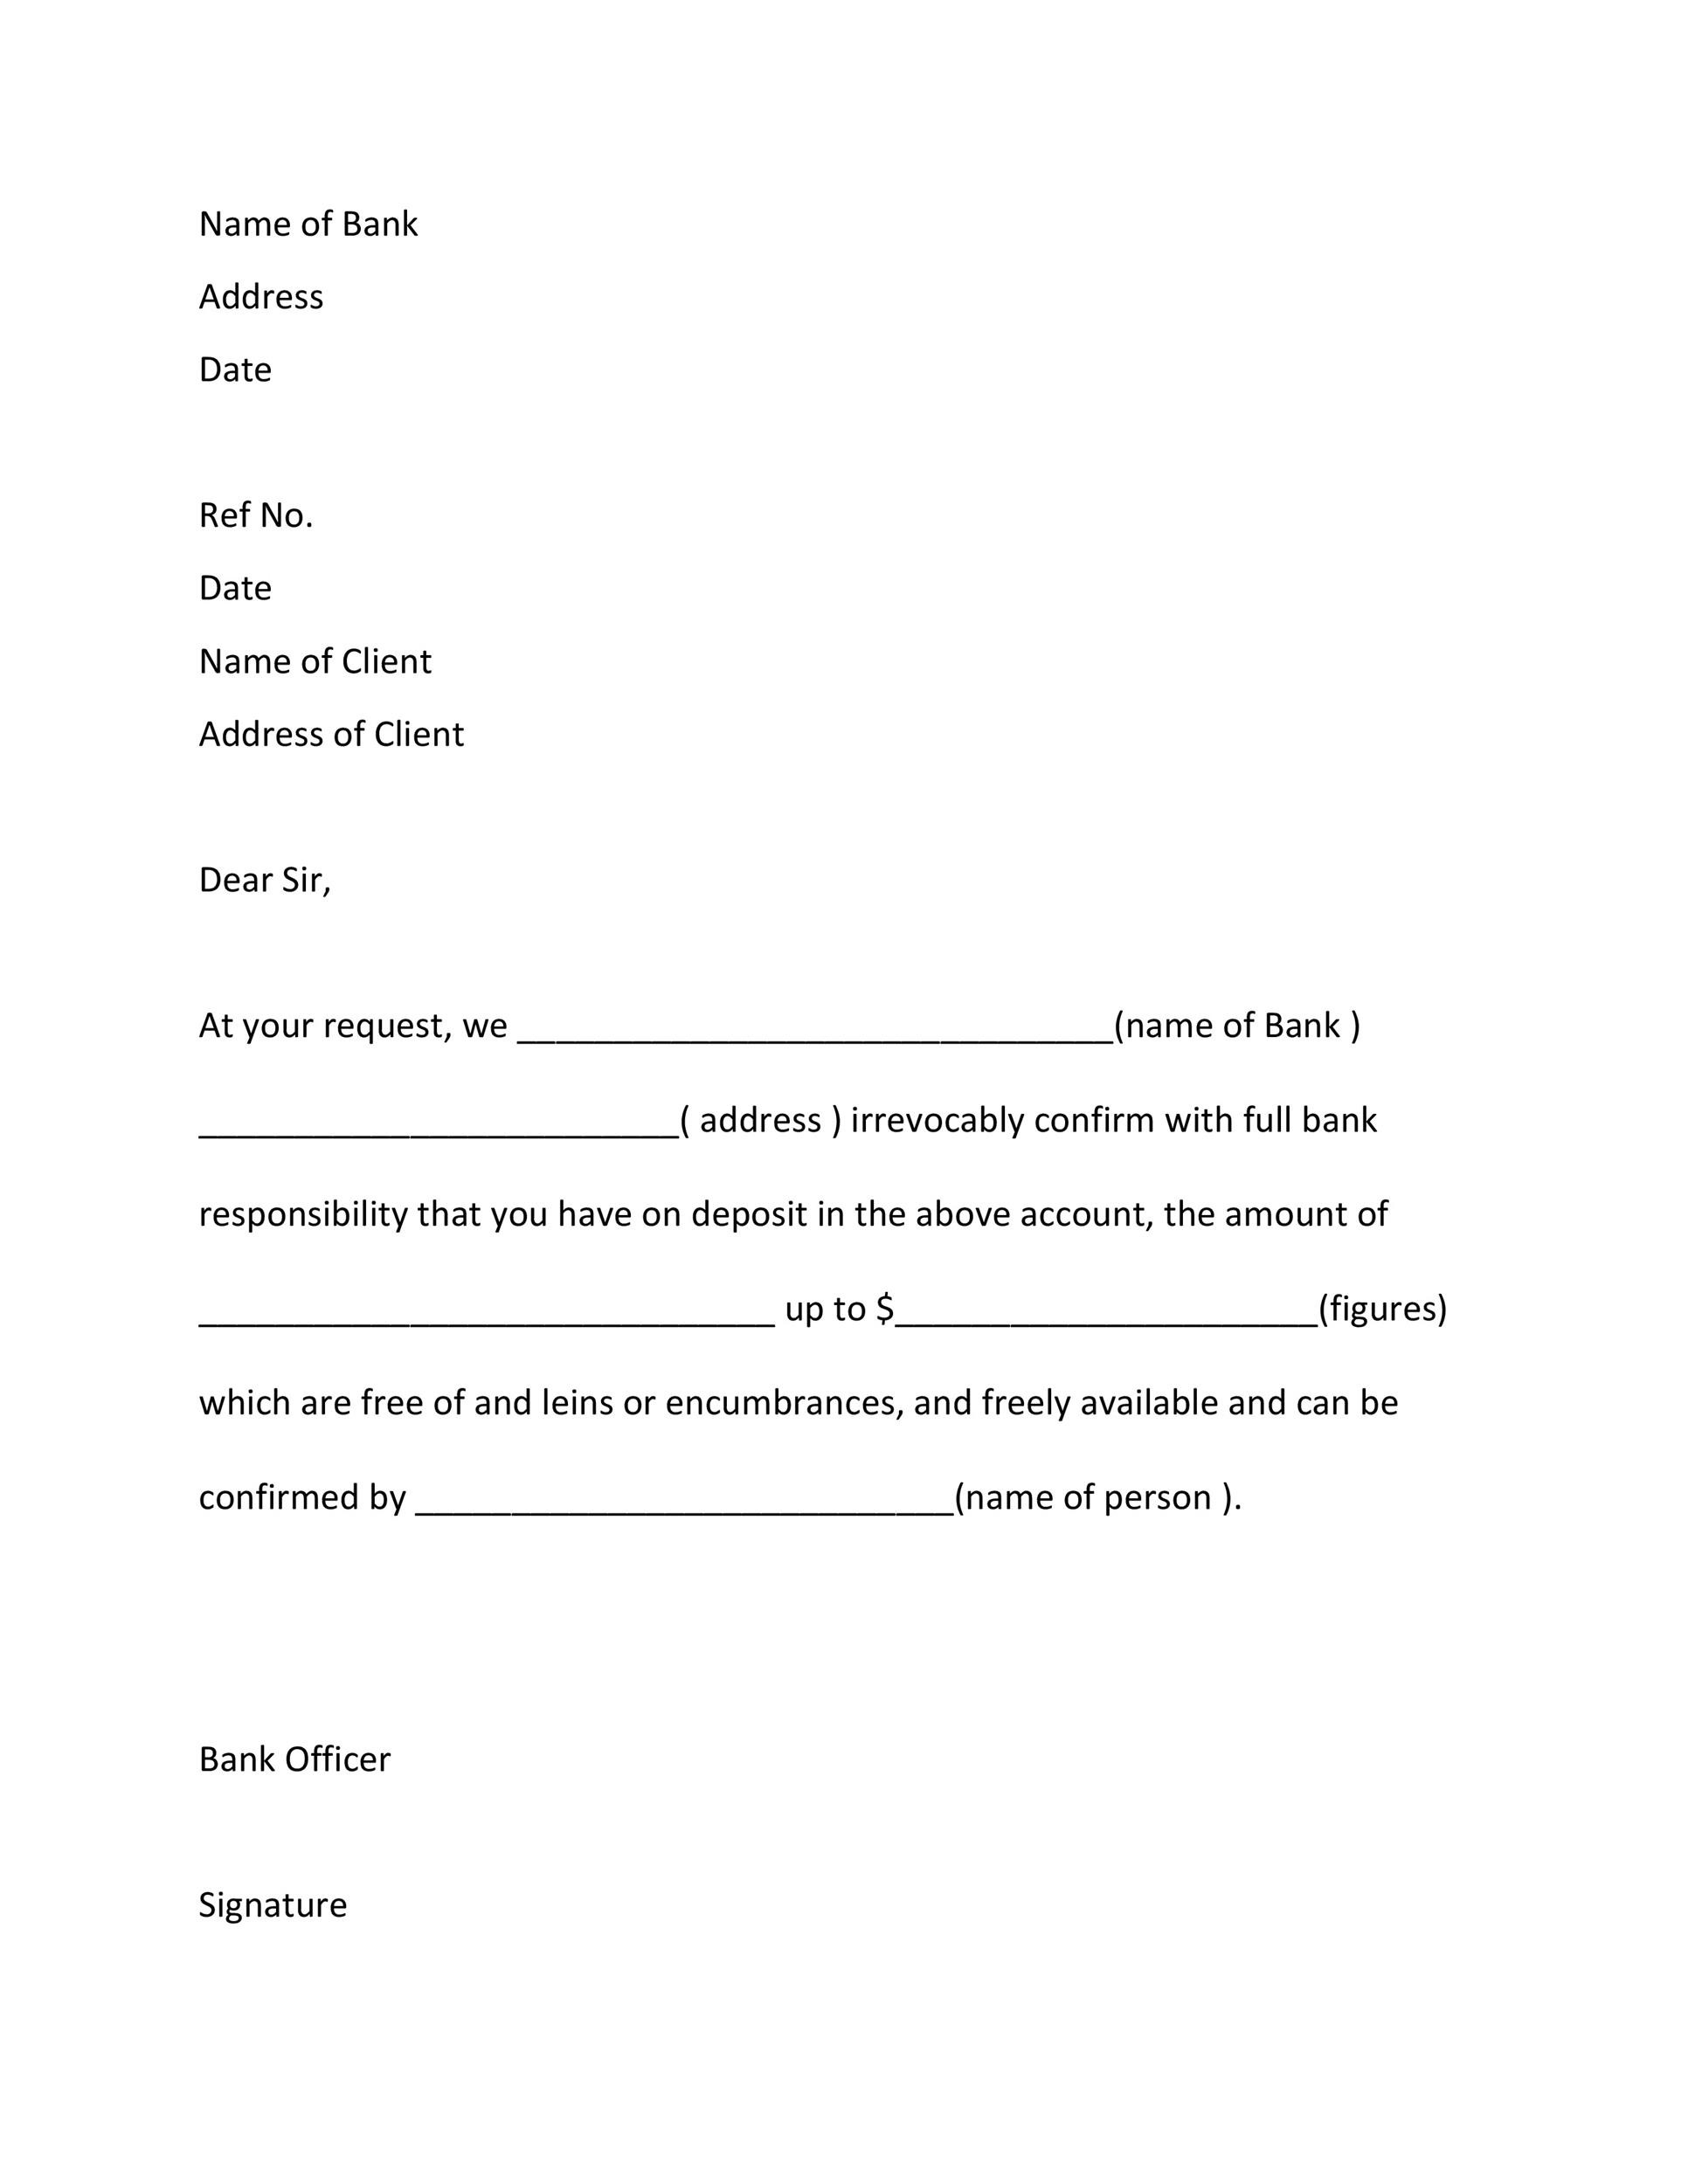 10 Best Proof of Funds Letter Templates ᐅ TemplateLab With Proof Of Deposit Template Throughout Proof Of Deposit Template